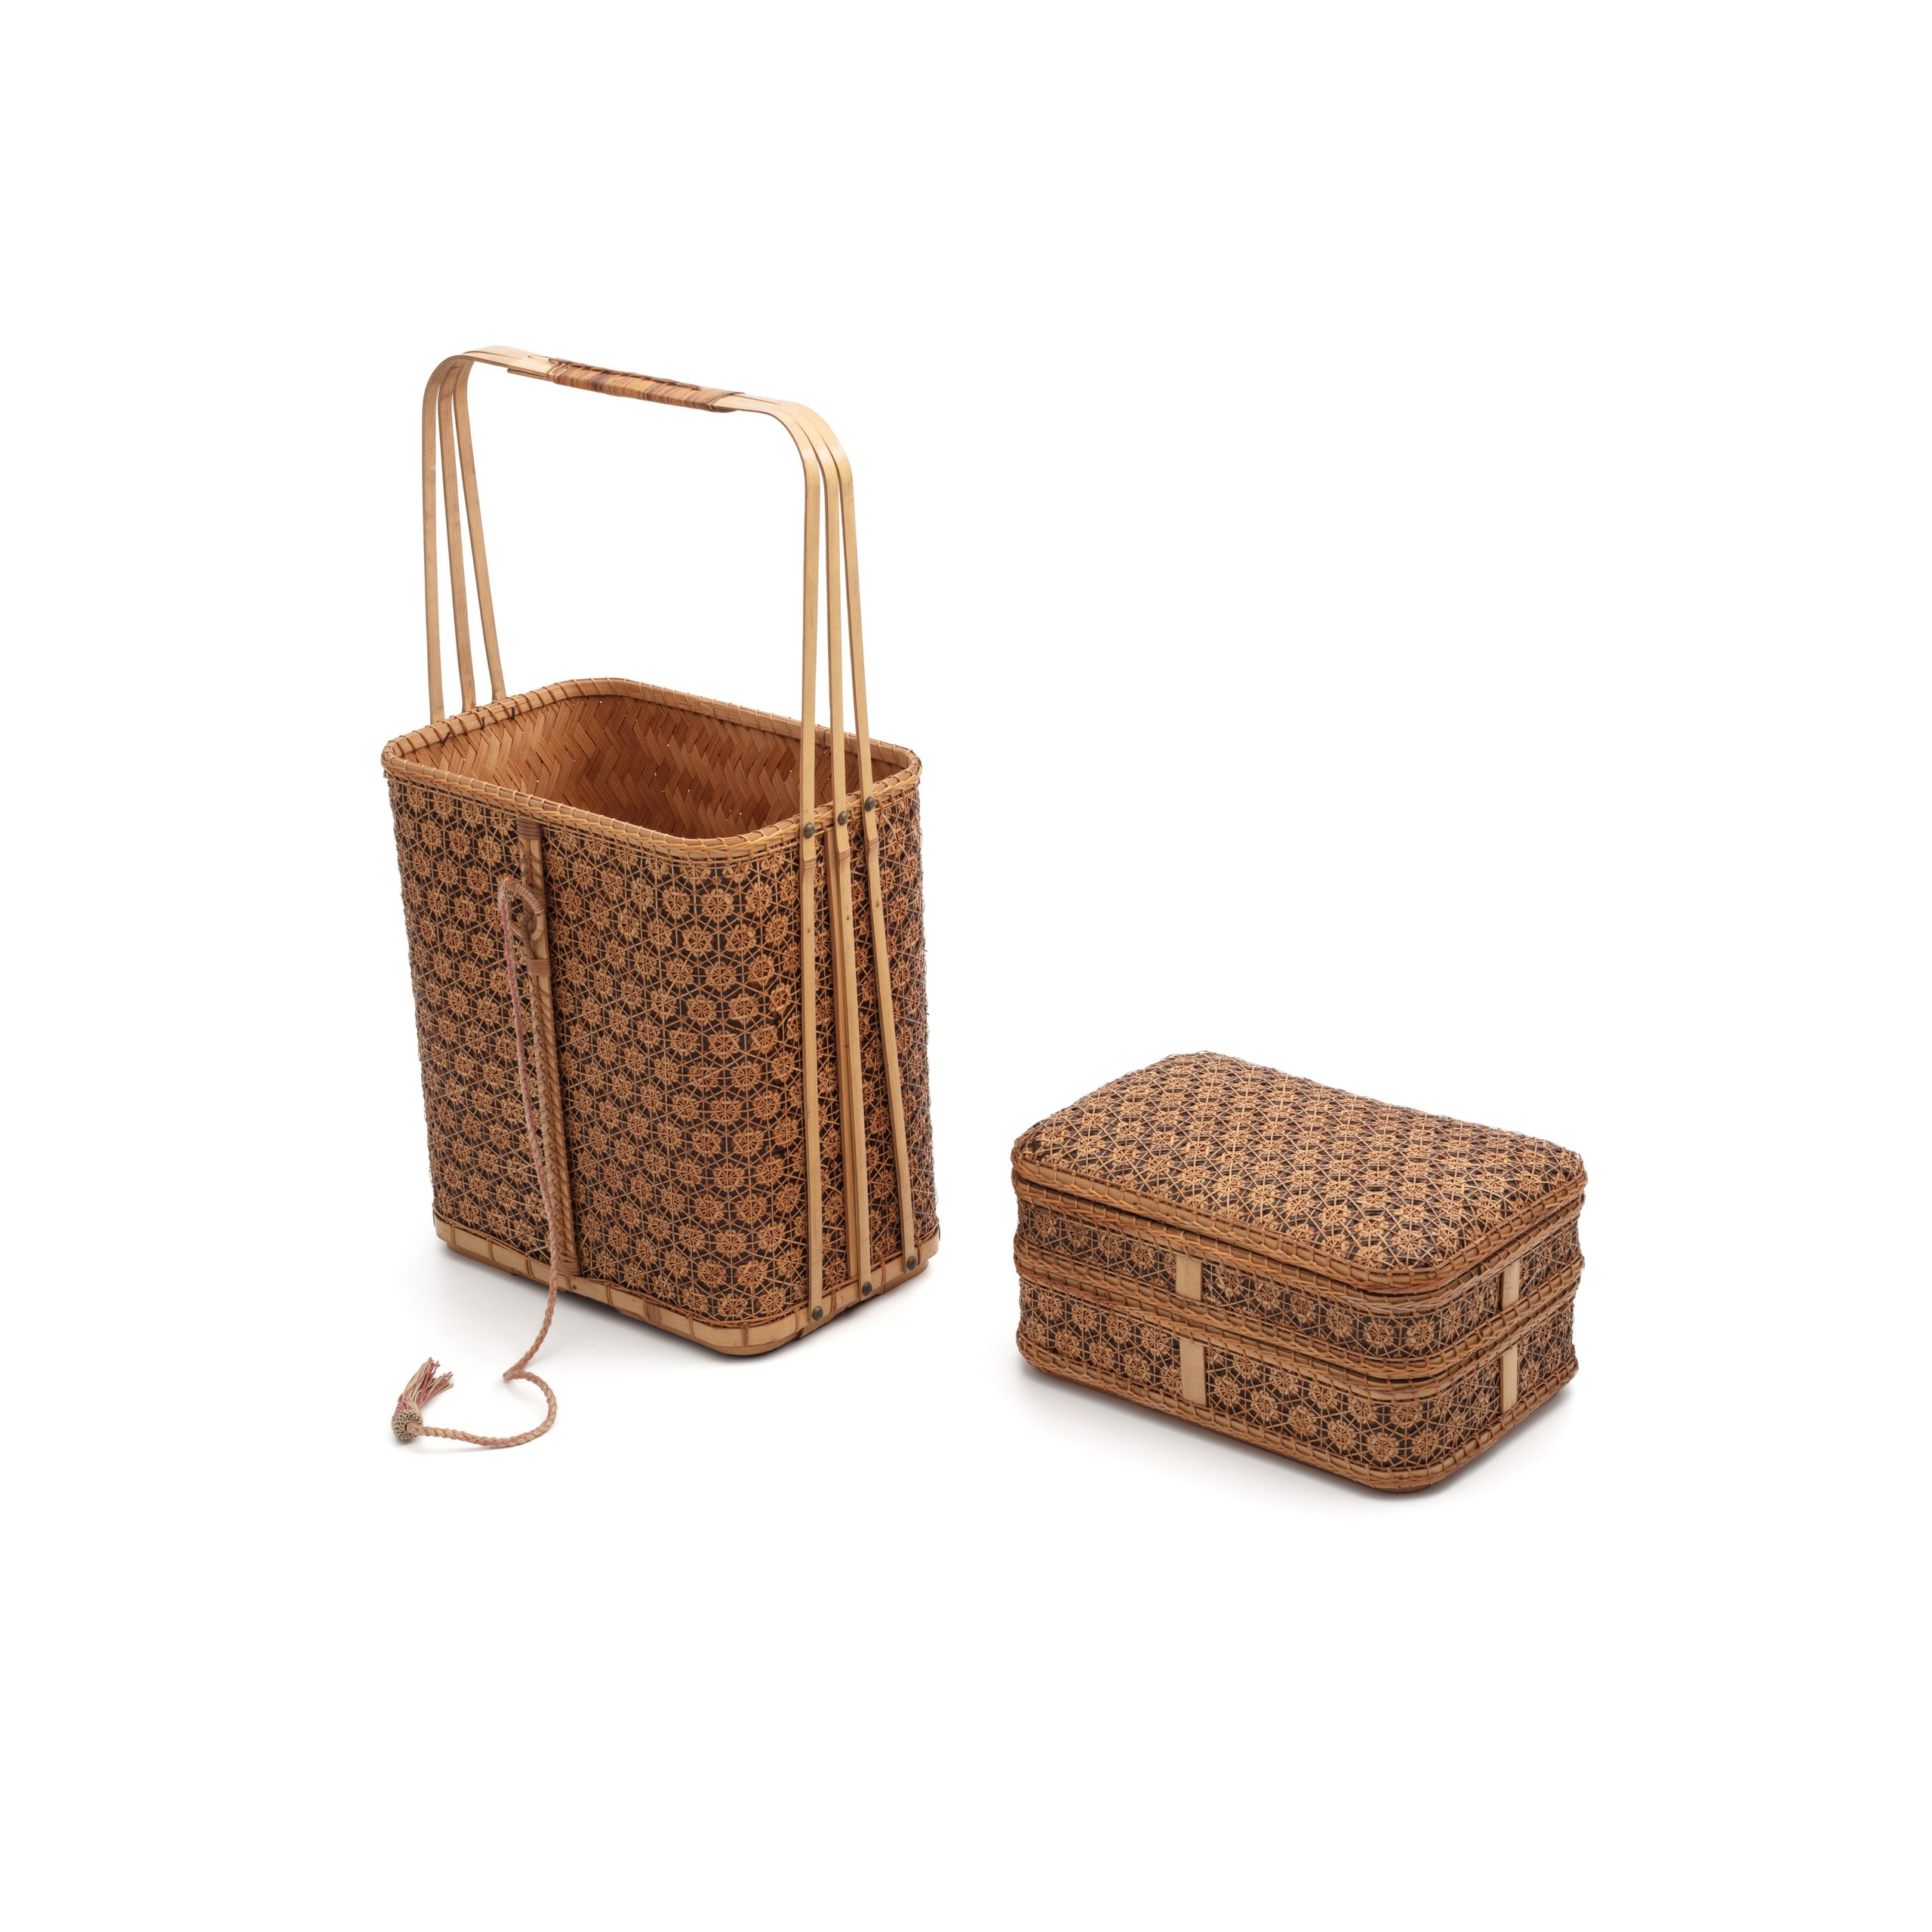 Bamboo basket with handle for tea utensils